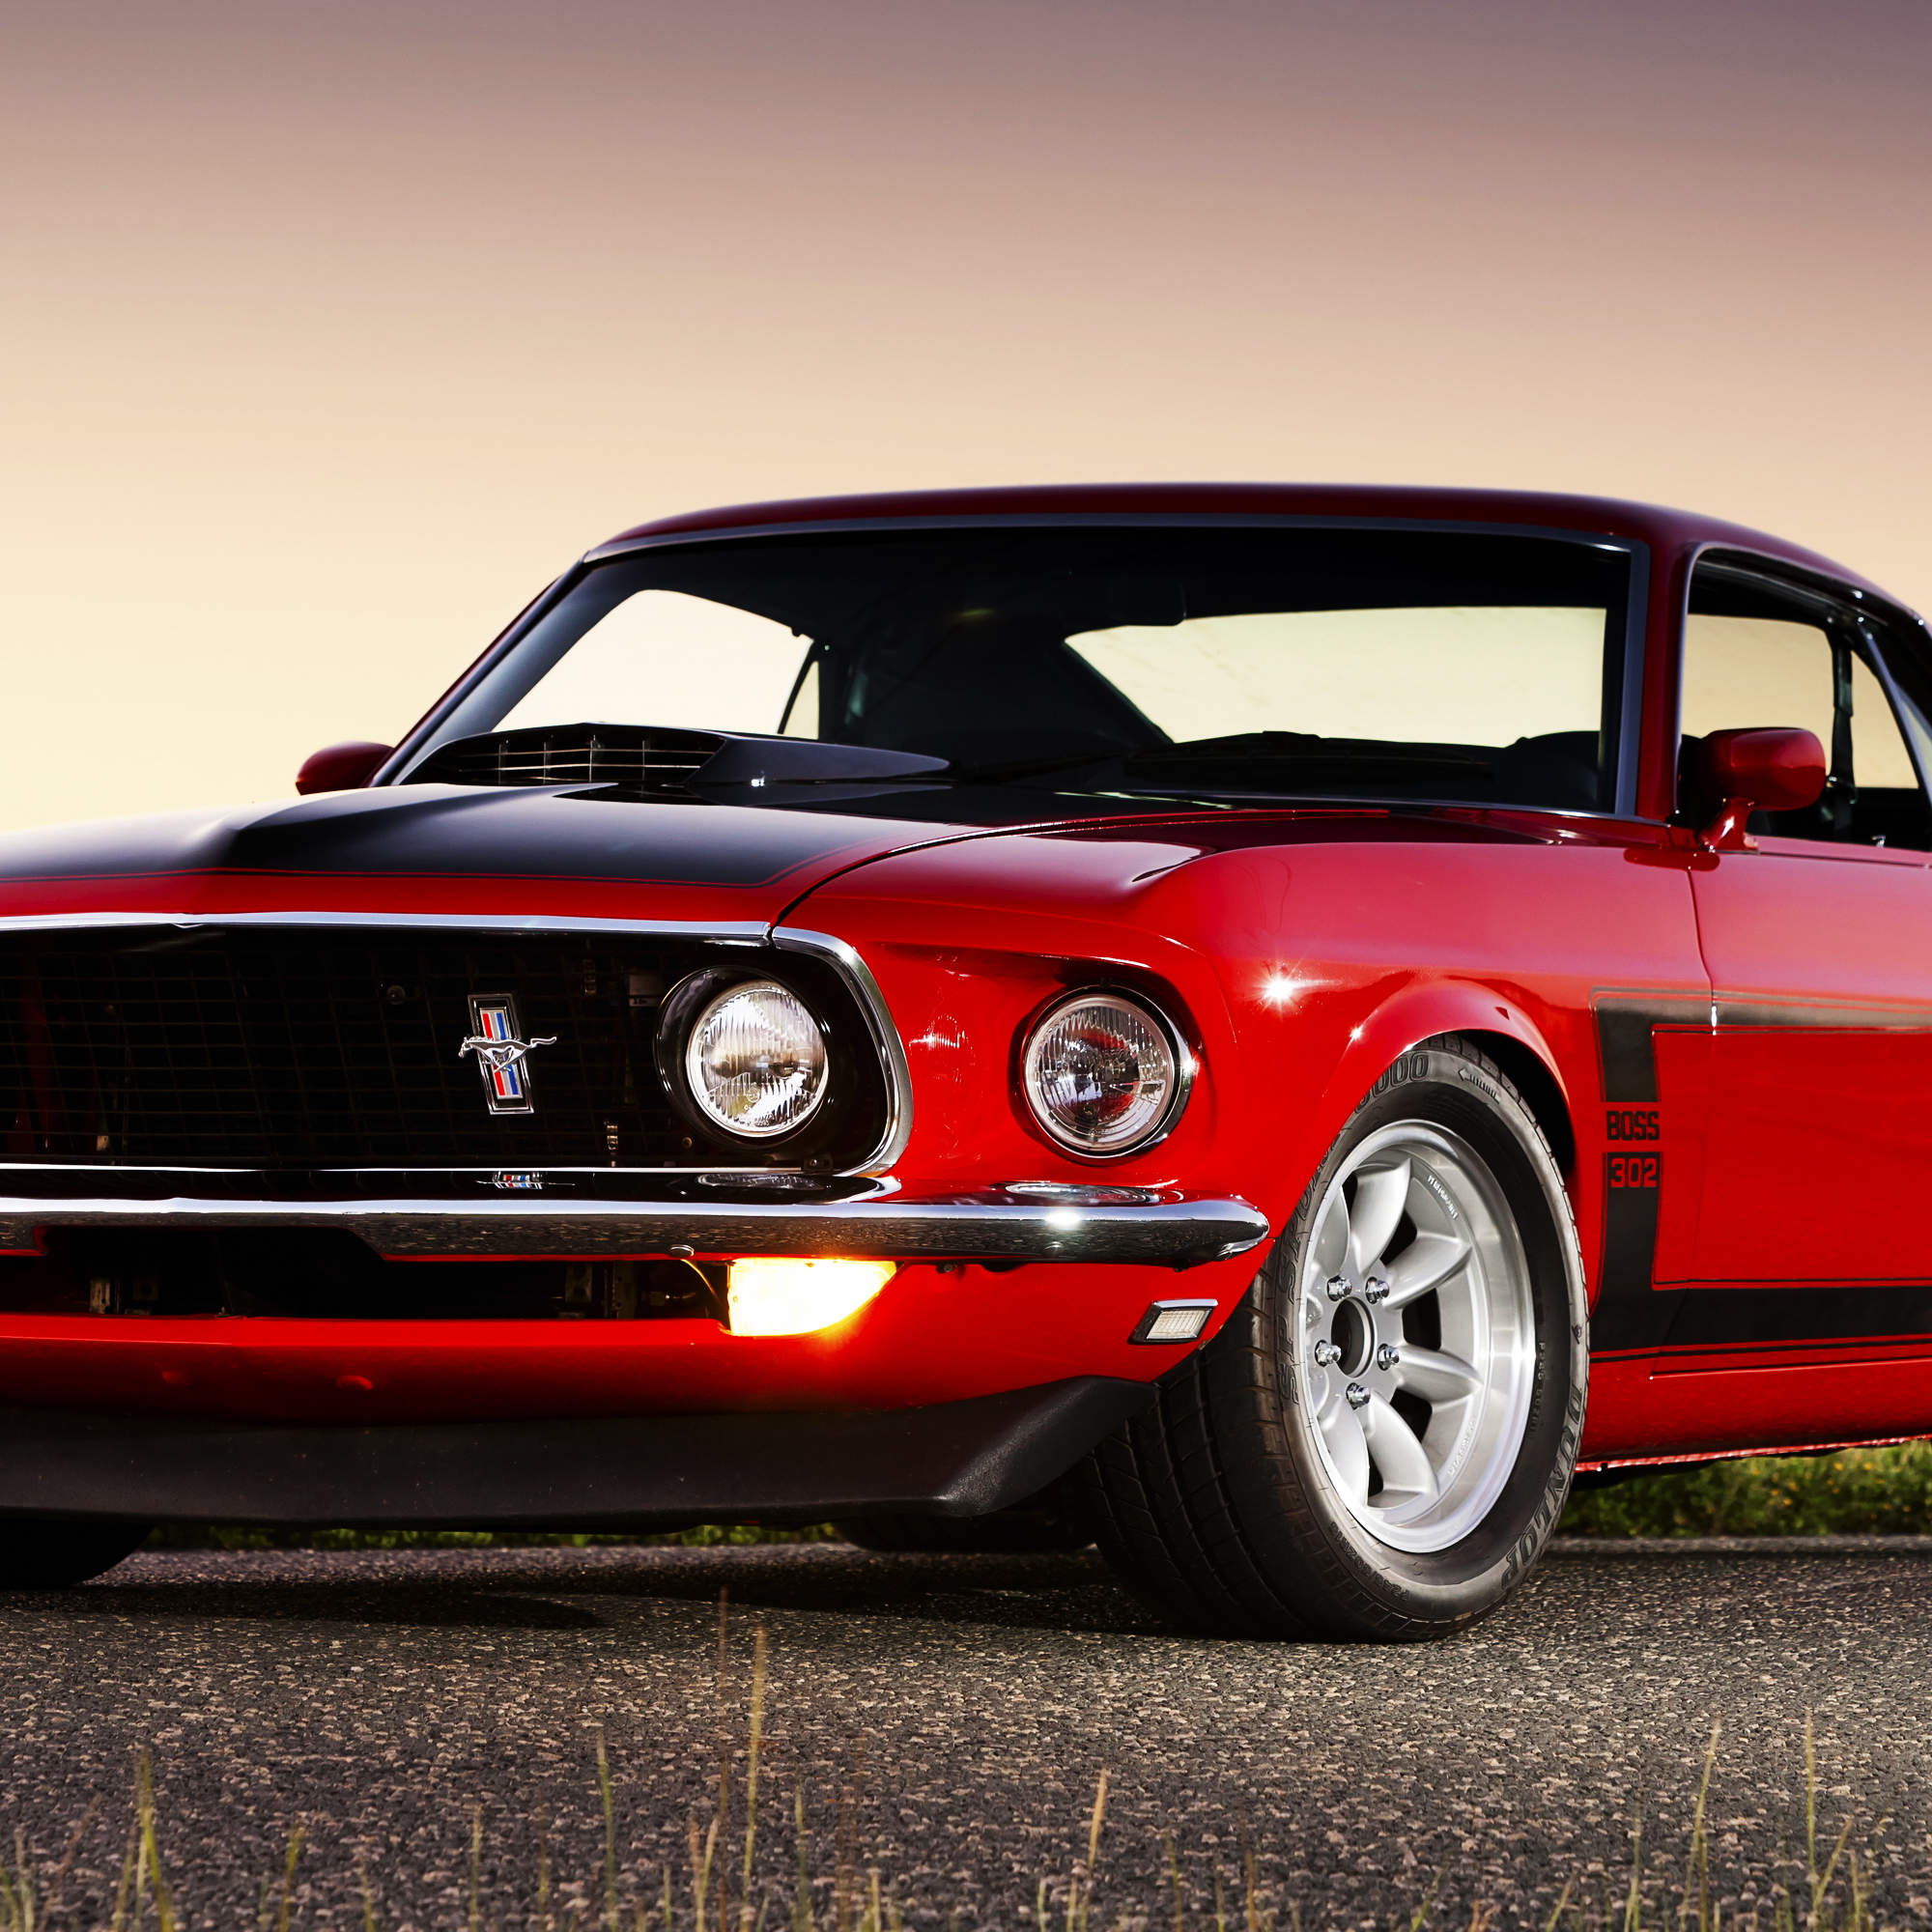 23 Things You Didn't Know About Ford Mustangs - Supercompressor.com